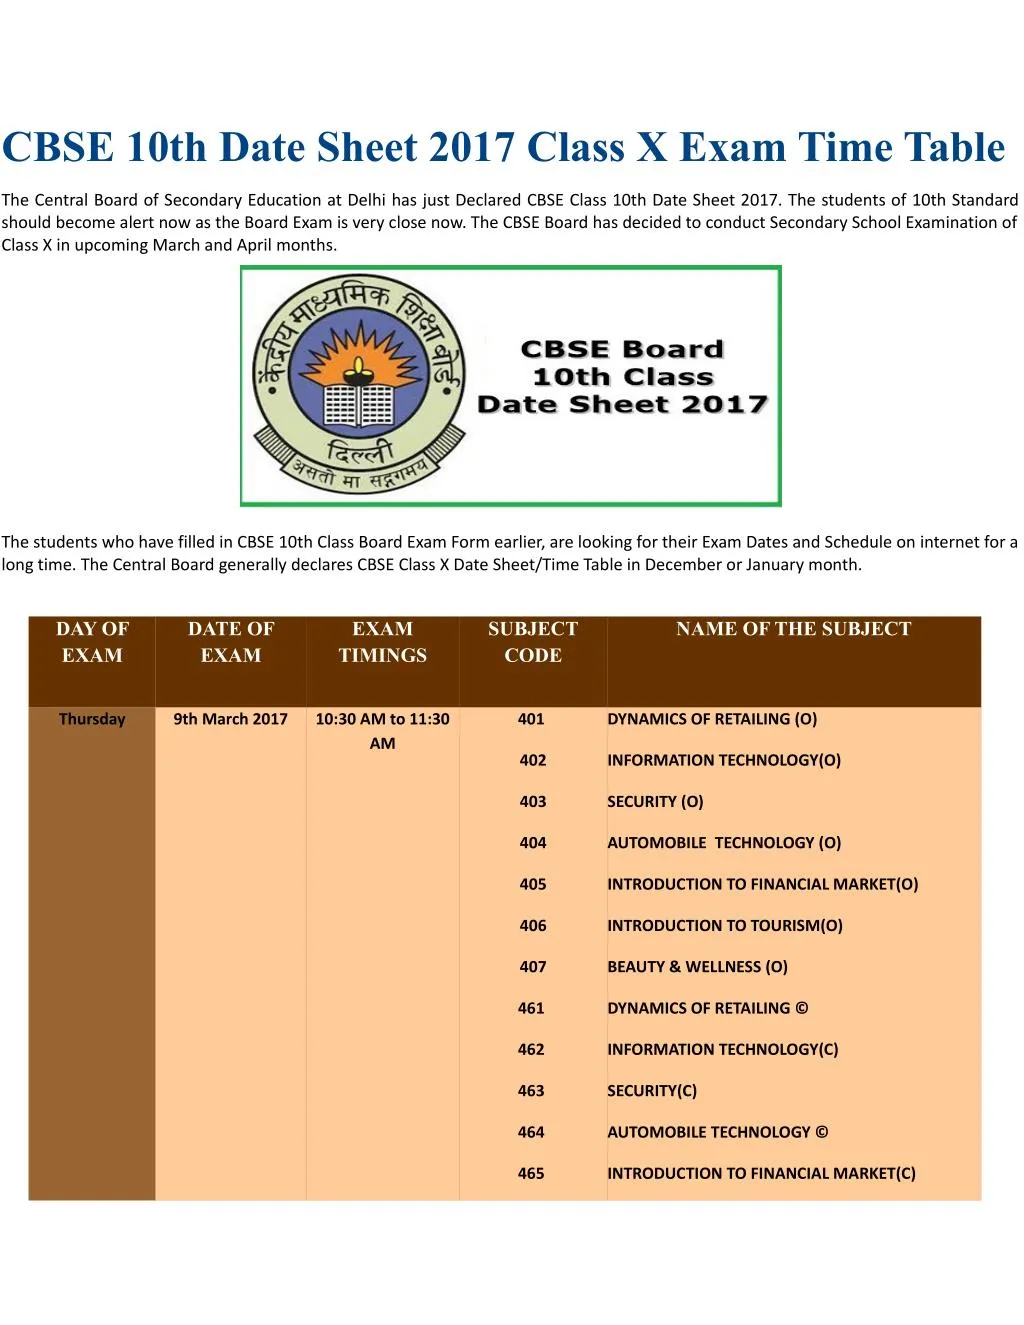 cbse 10th date sheet 2017 class x exam time table